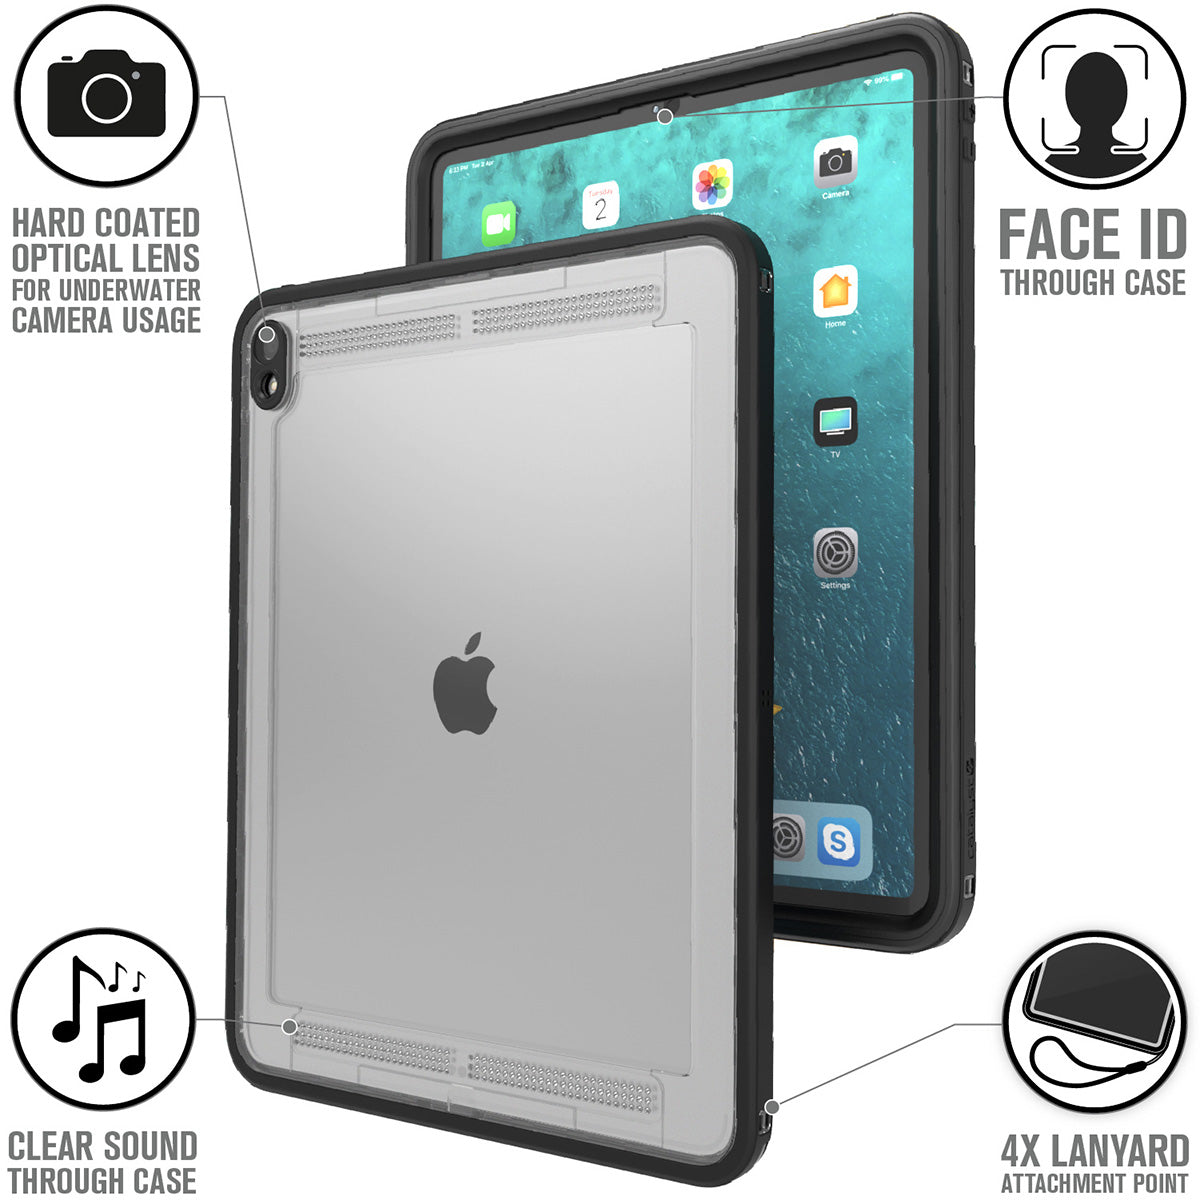 Catalyst waterproof case for ipad pro gen 3 12.9in black clear sound faceid through case shows attachment points Text reads hard coated optical lens for underwater camera usage Face Id thorugh case clear sound through case 4x lanyard attachment point